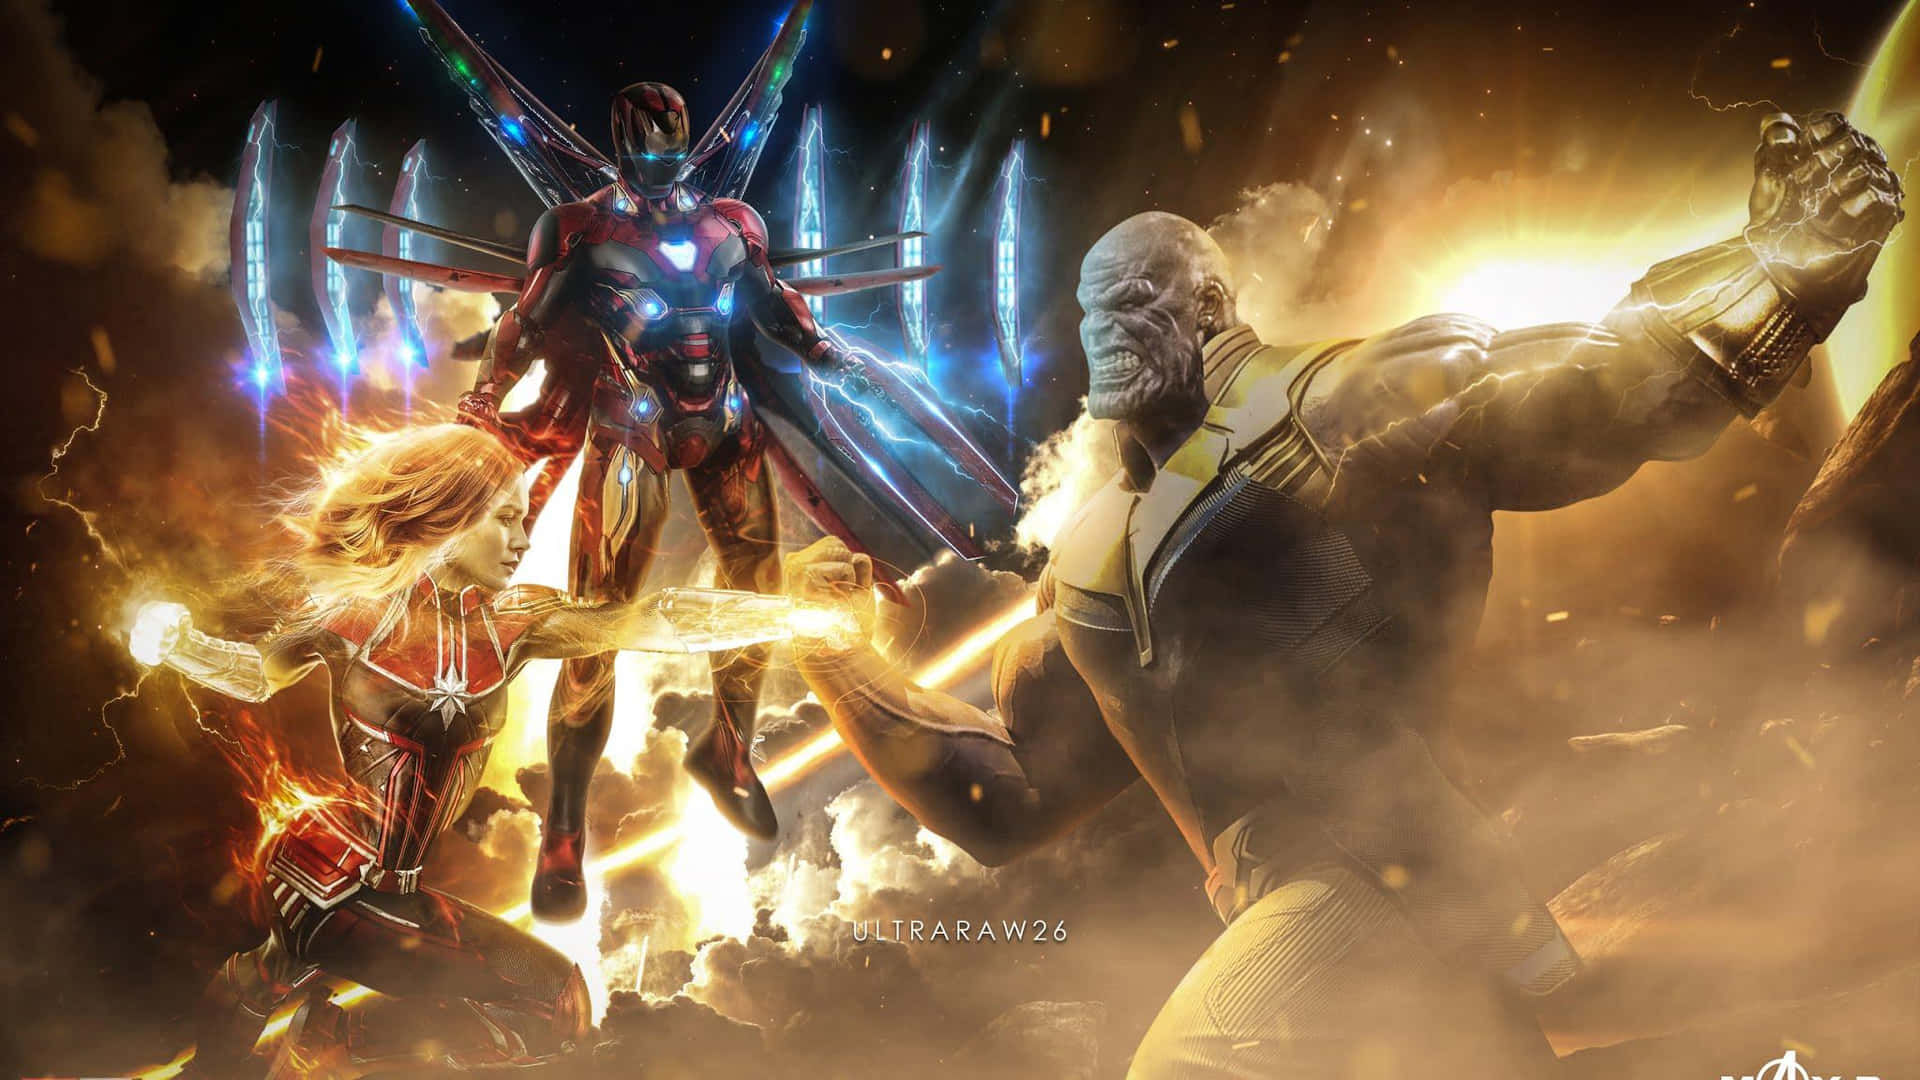 Iron Man Vs Thanos - The Battle for the Infinity Gauntlet Wallpaper